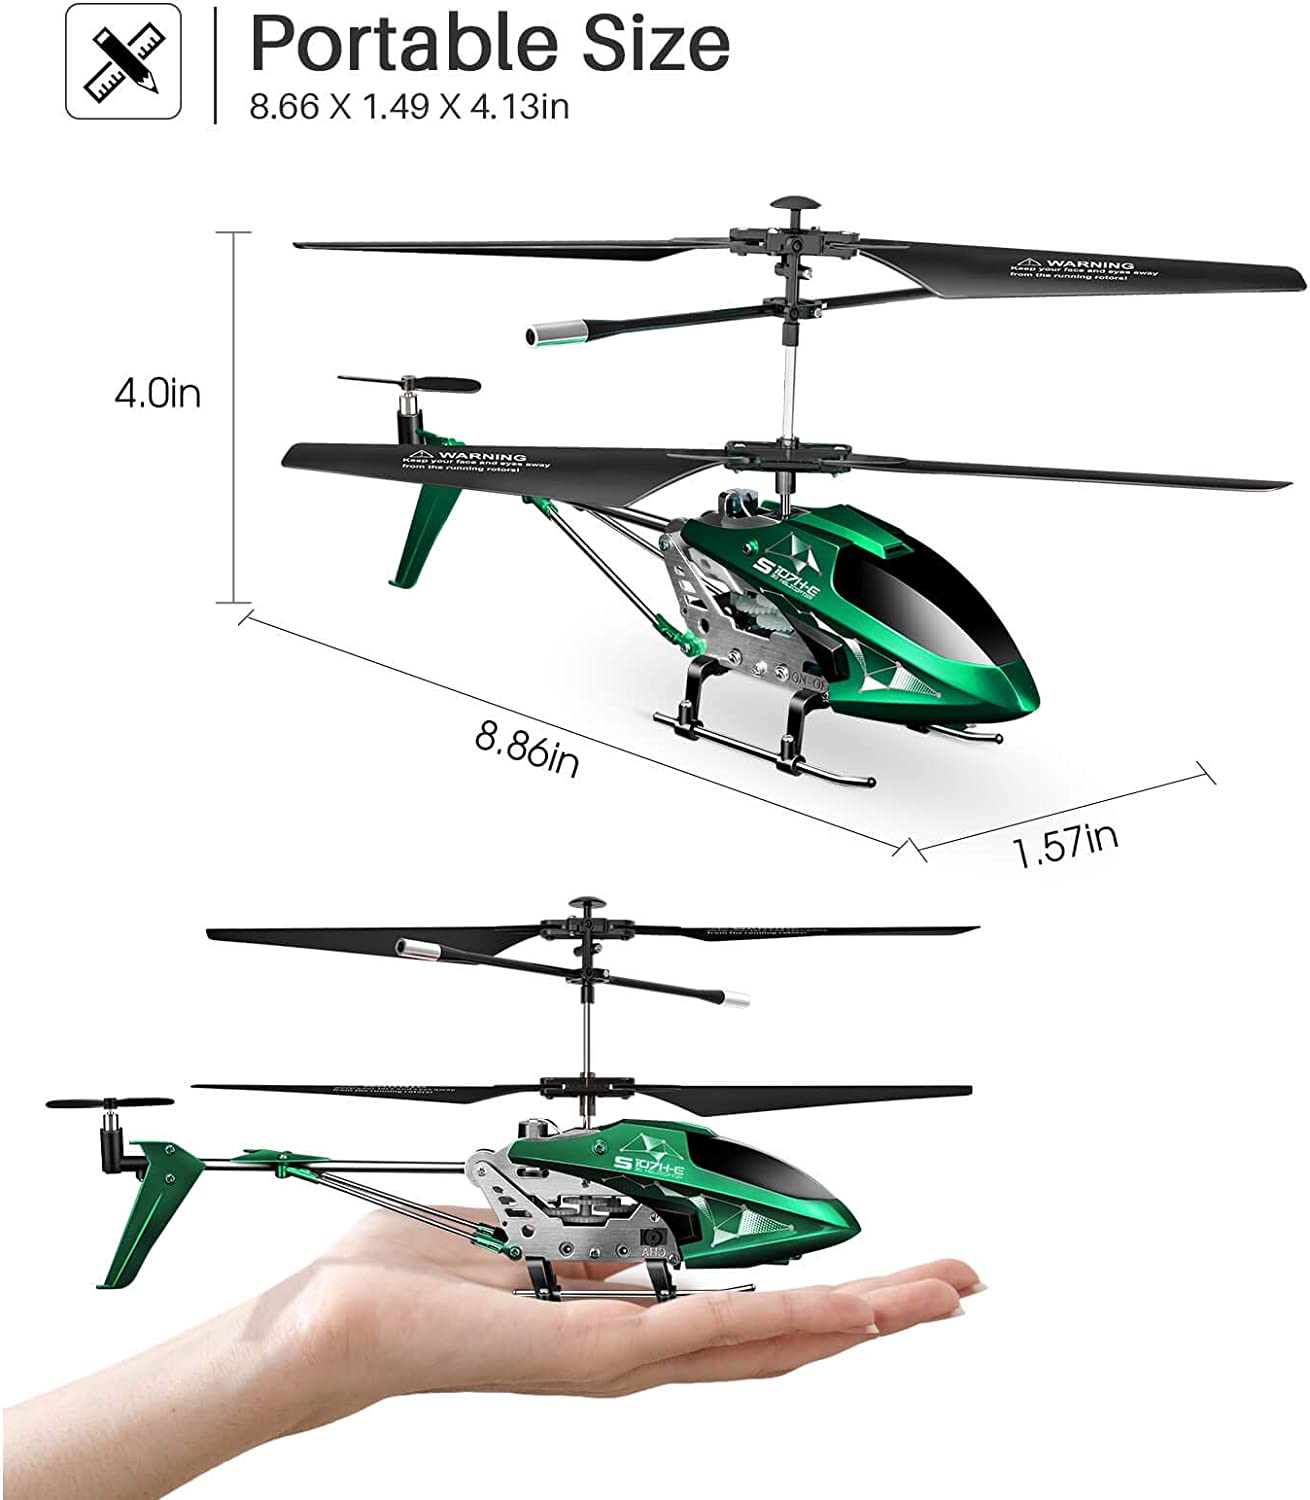 Size measurements for a green colored remote control helicopter model number S107H-E. The size is 8.86 inches depth, 1.57 inches wide and 4.0 inches height.